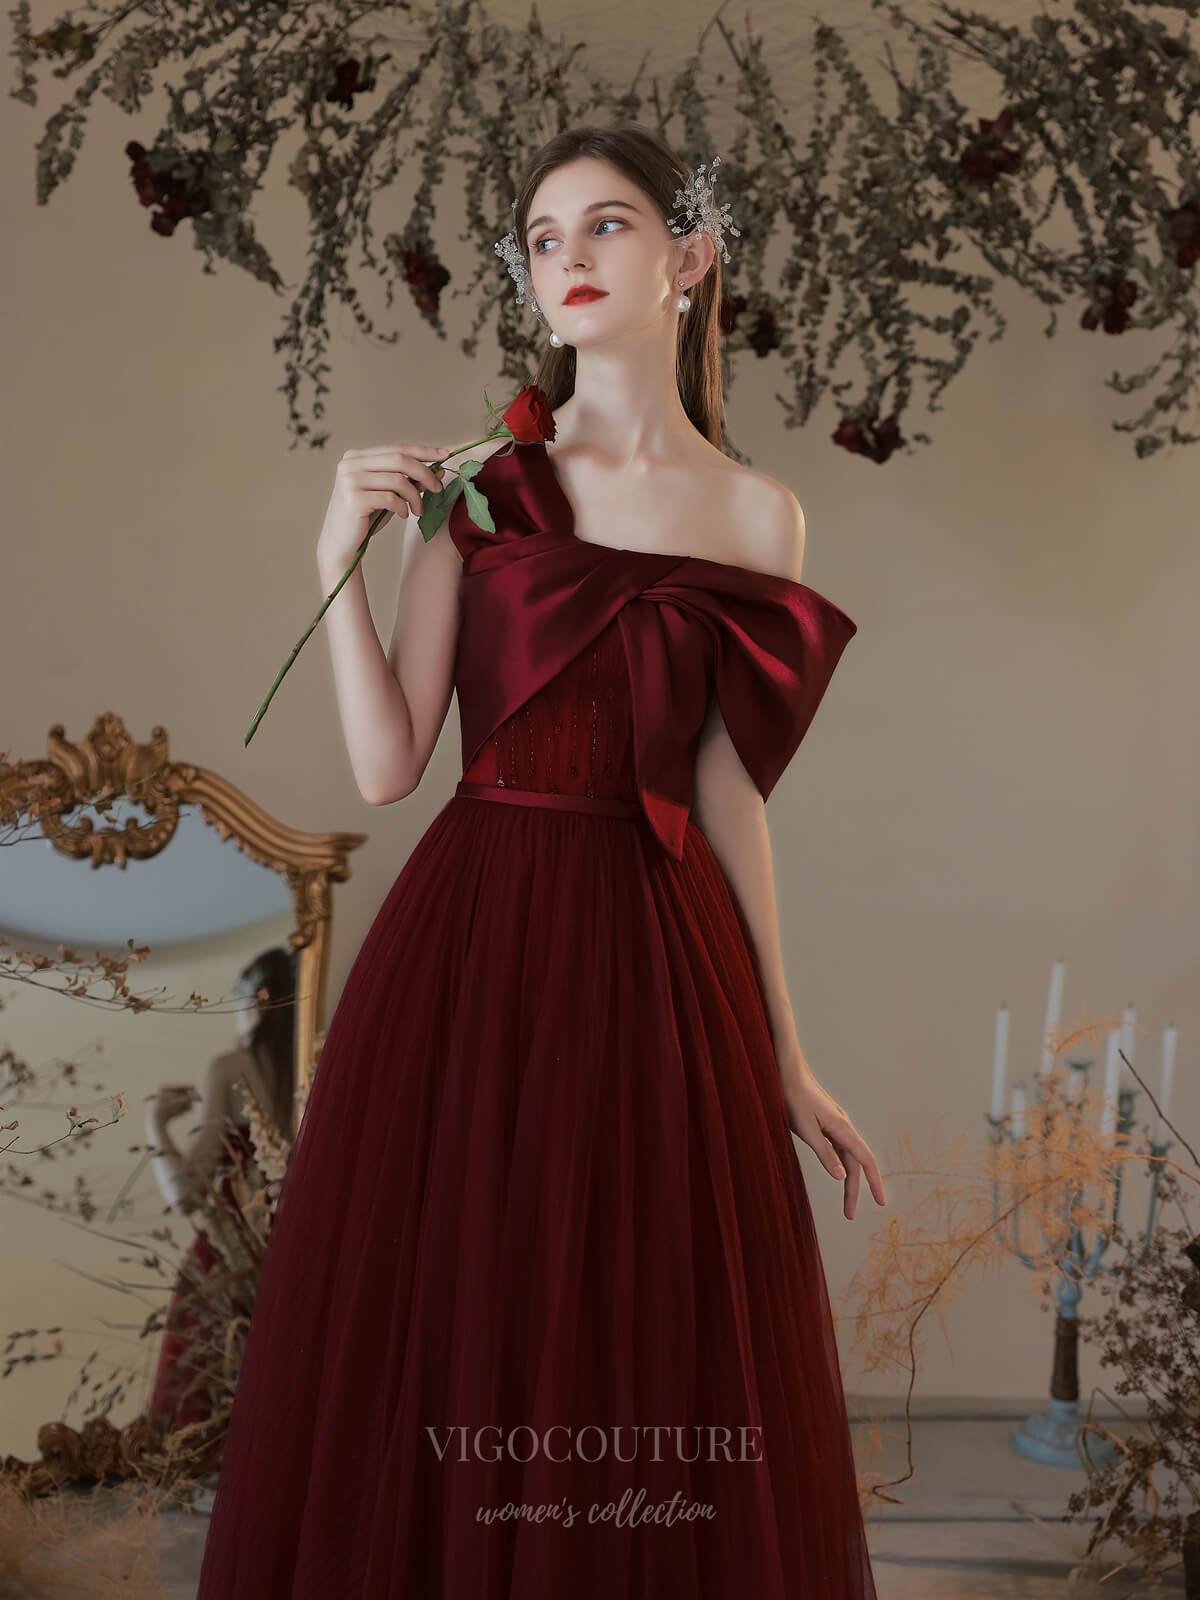 vigocouture-Burgundy Strapless Tulle Bow Prom Dress 20743-Prom Dresses-vigocouture-